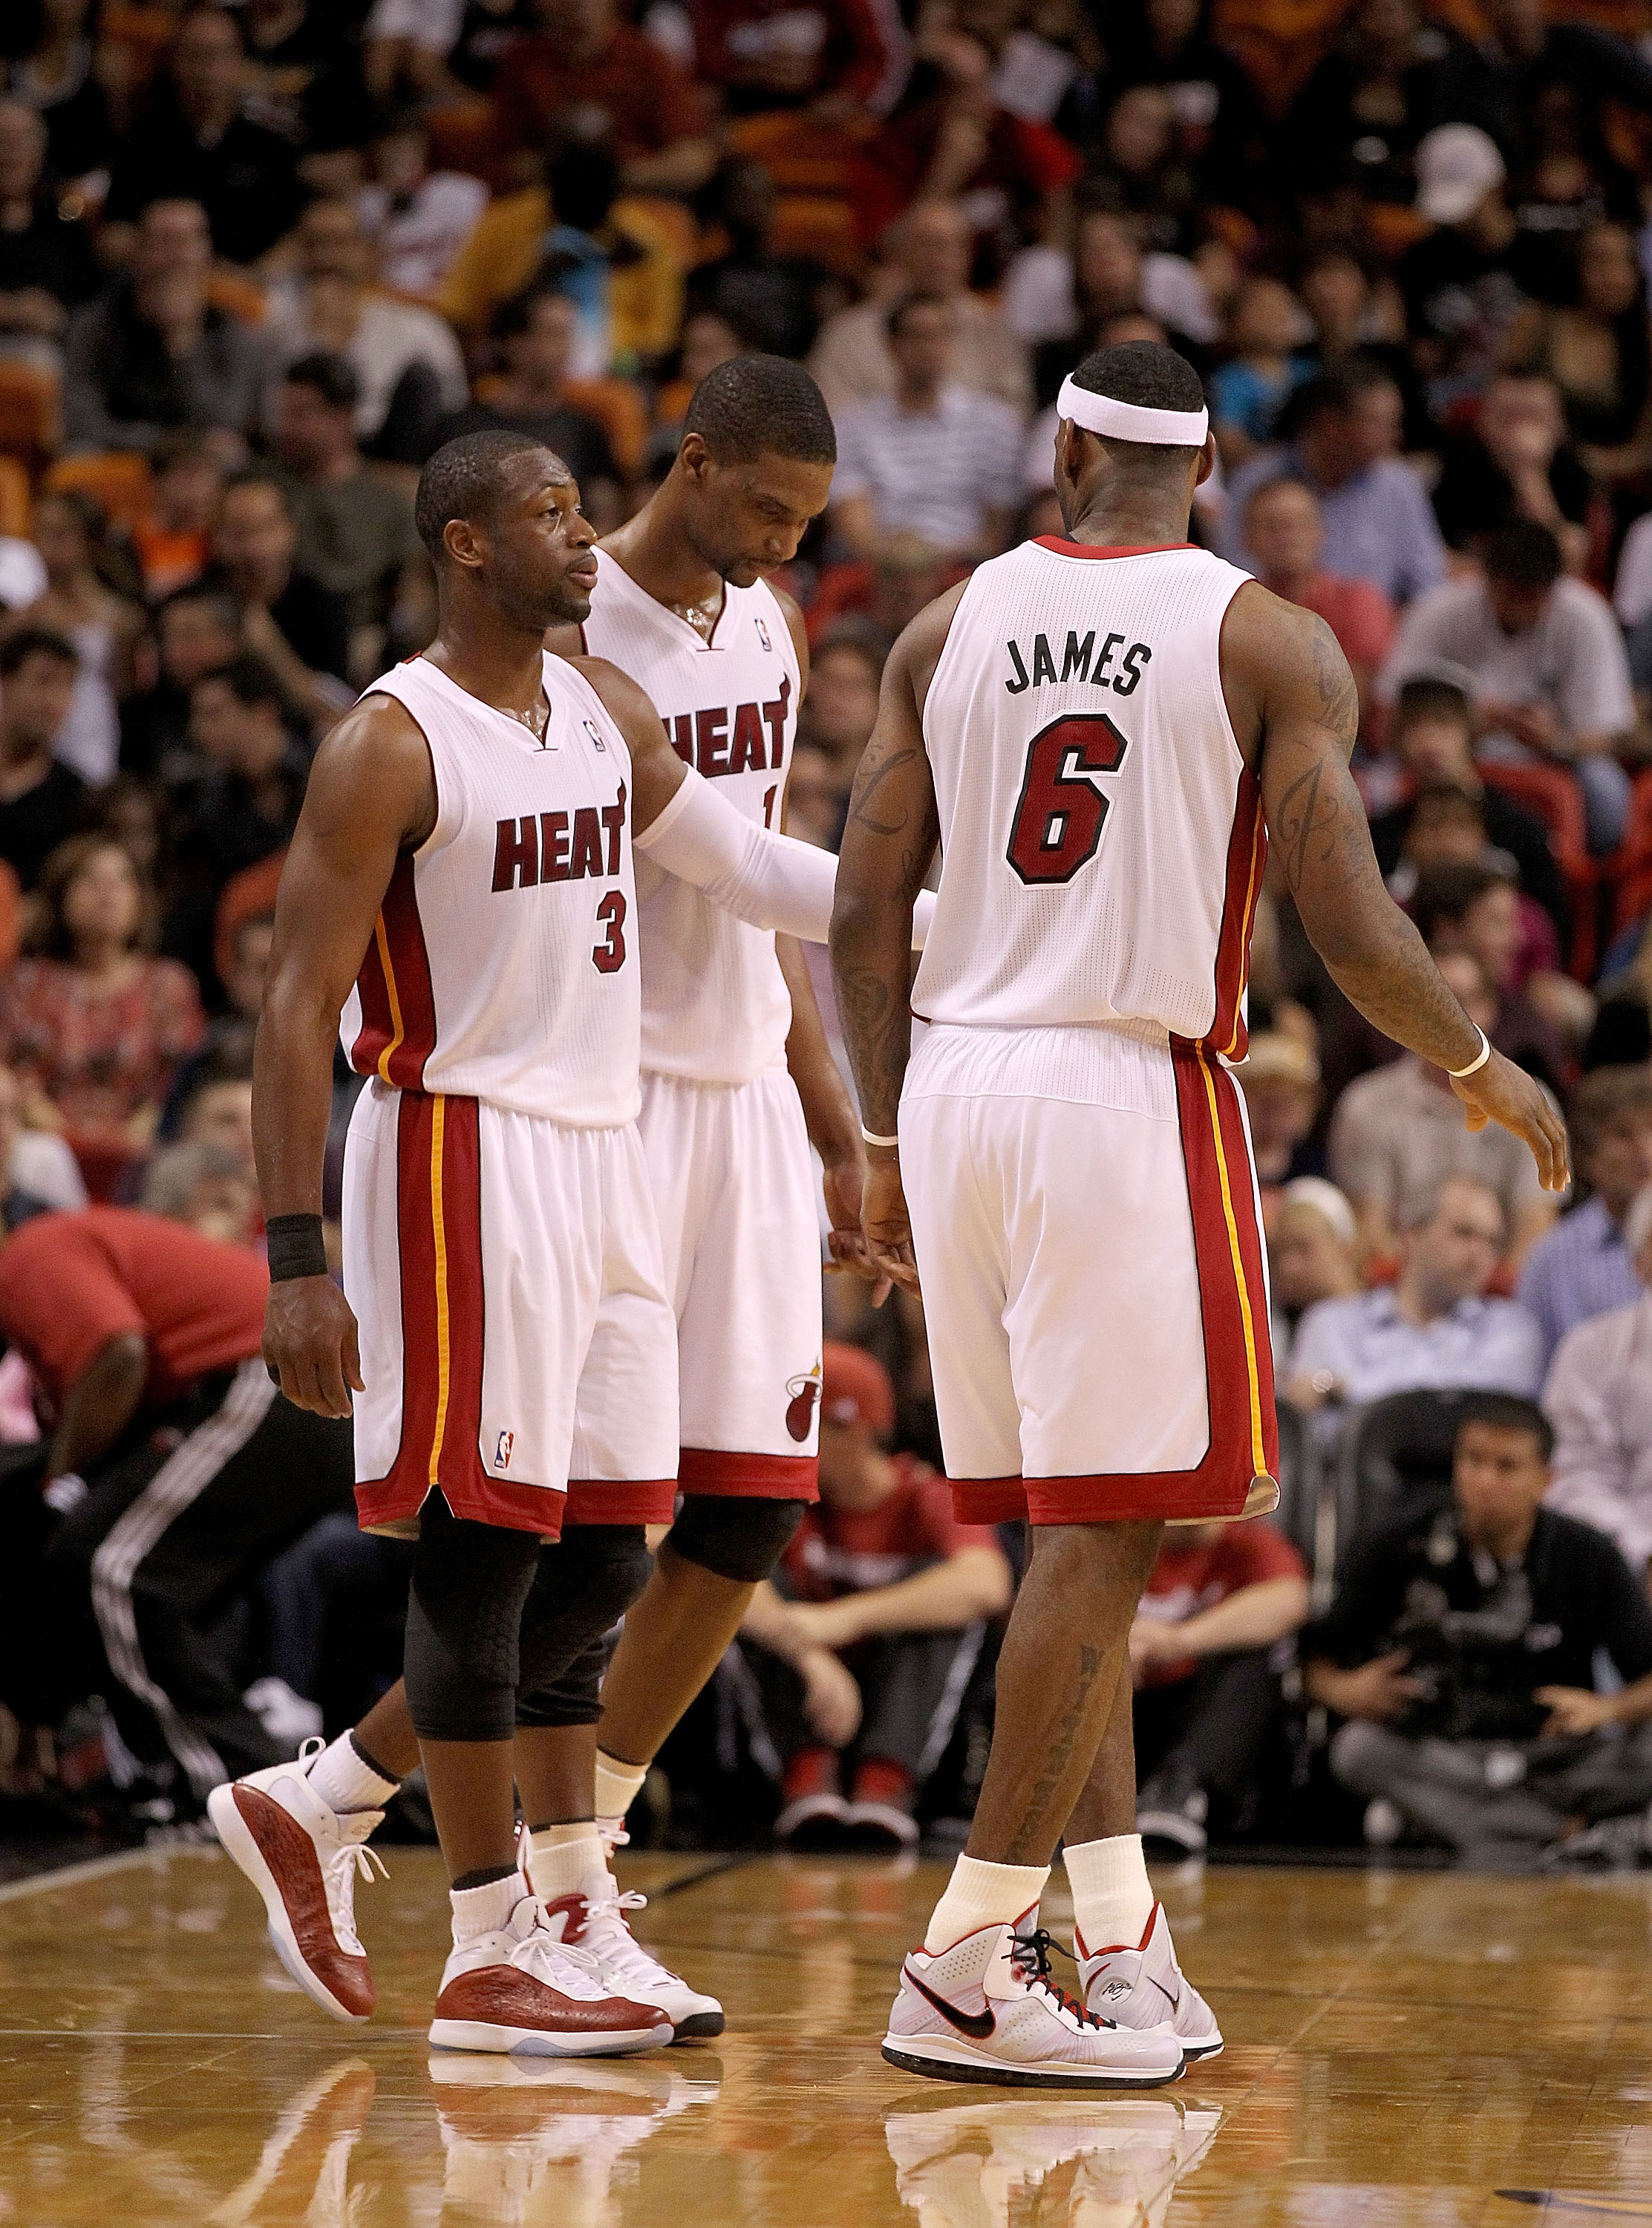 MIAMI, FL - FEBRUARY 25:  LeBron James #6, Dwyane Wade #3 and Chris Bosh #1 of the Miami Heat talk during a game against the Washington Wizards at American Airlines Arena on February 25, 2011 in Miami, Florida. NOTE TO USER: User expressly acknowledges an